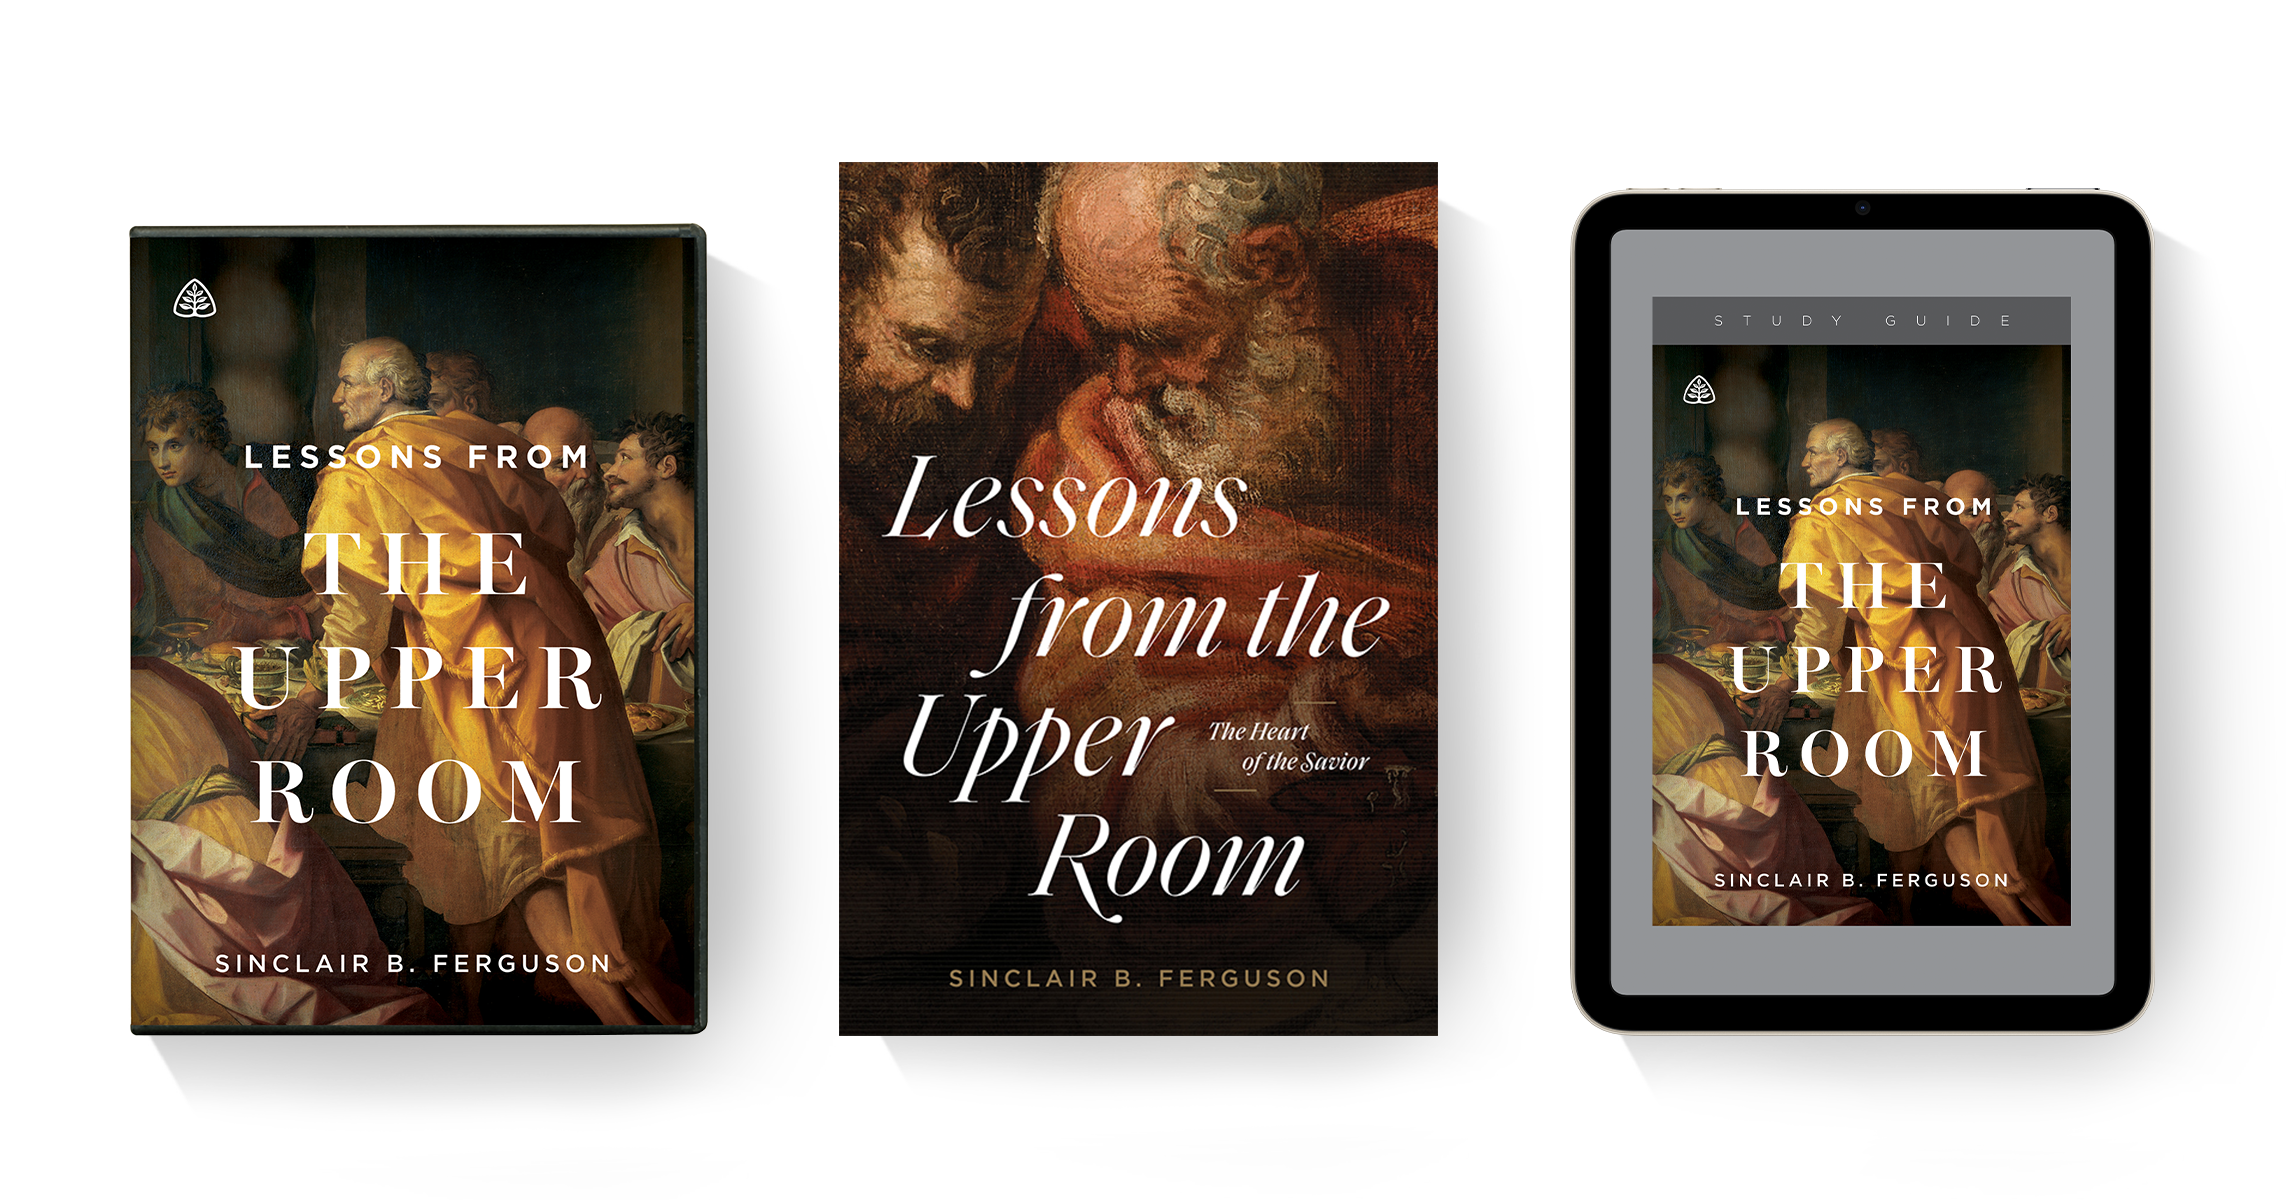 Lessons from the Upper Room DVD and Book